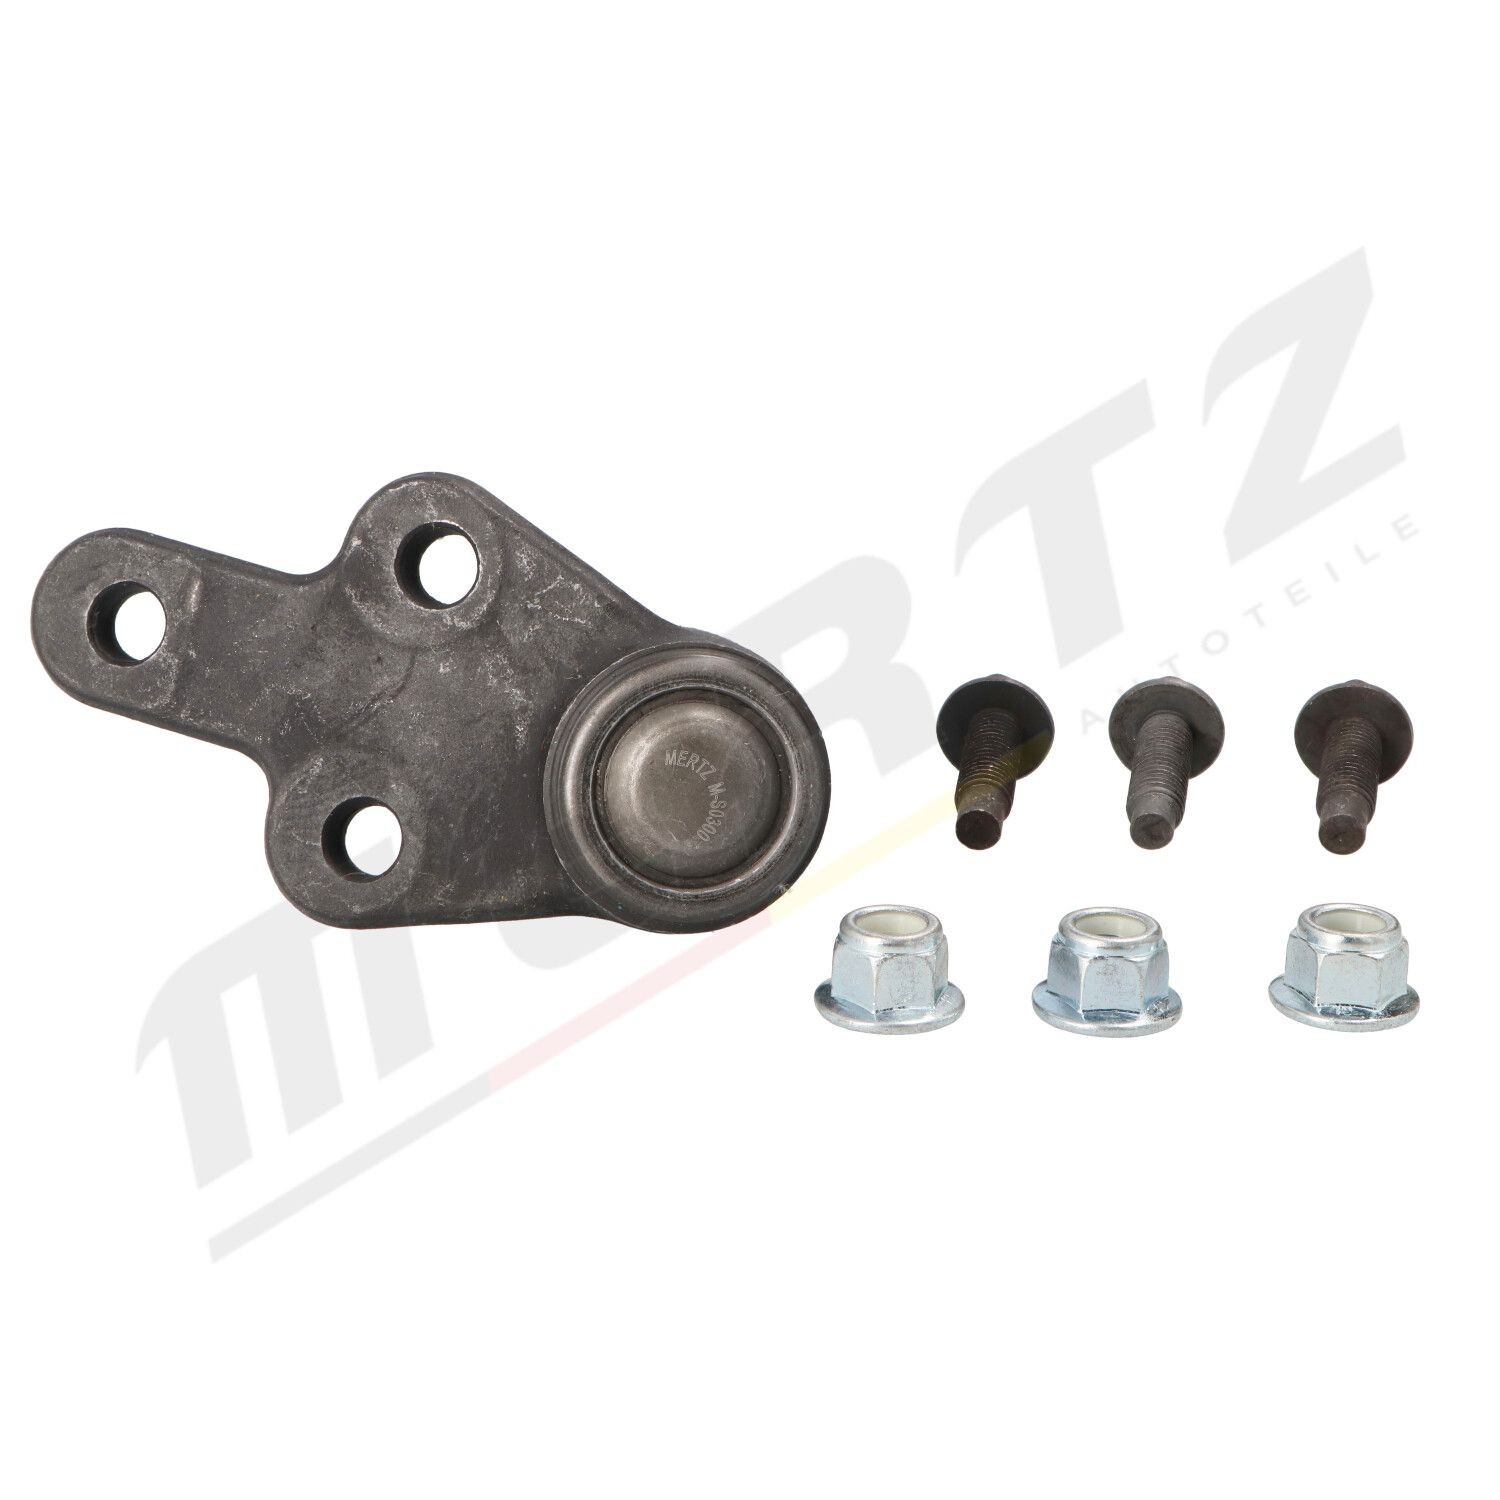 Ford Ball Joint MERTZ M-S0300 at a good price